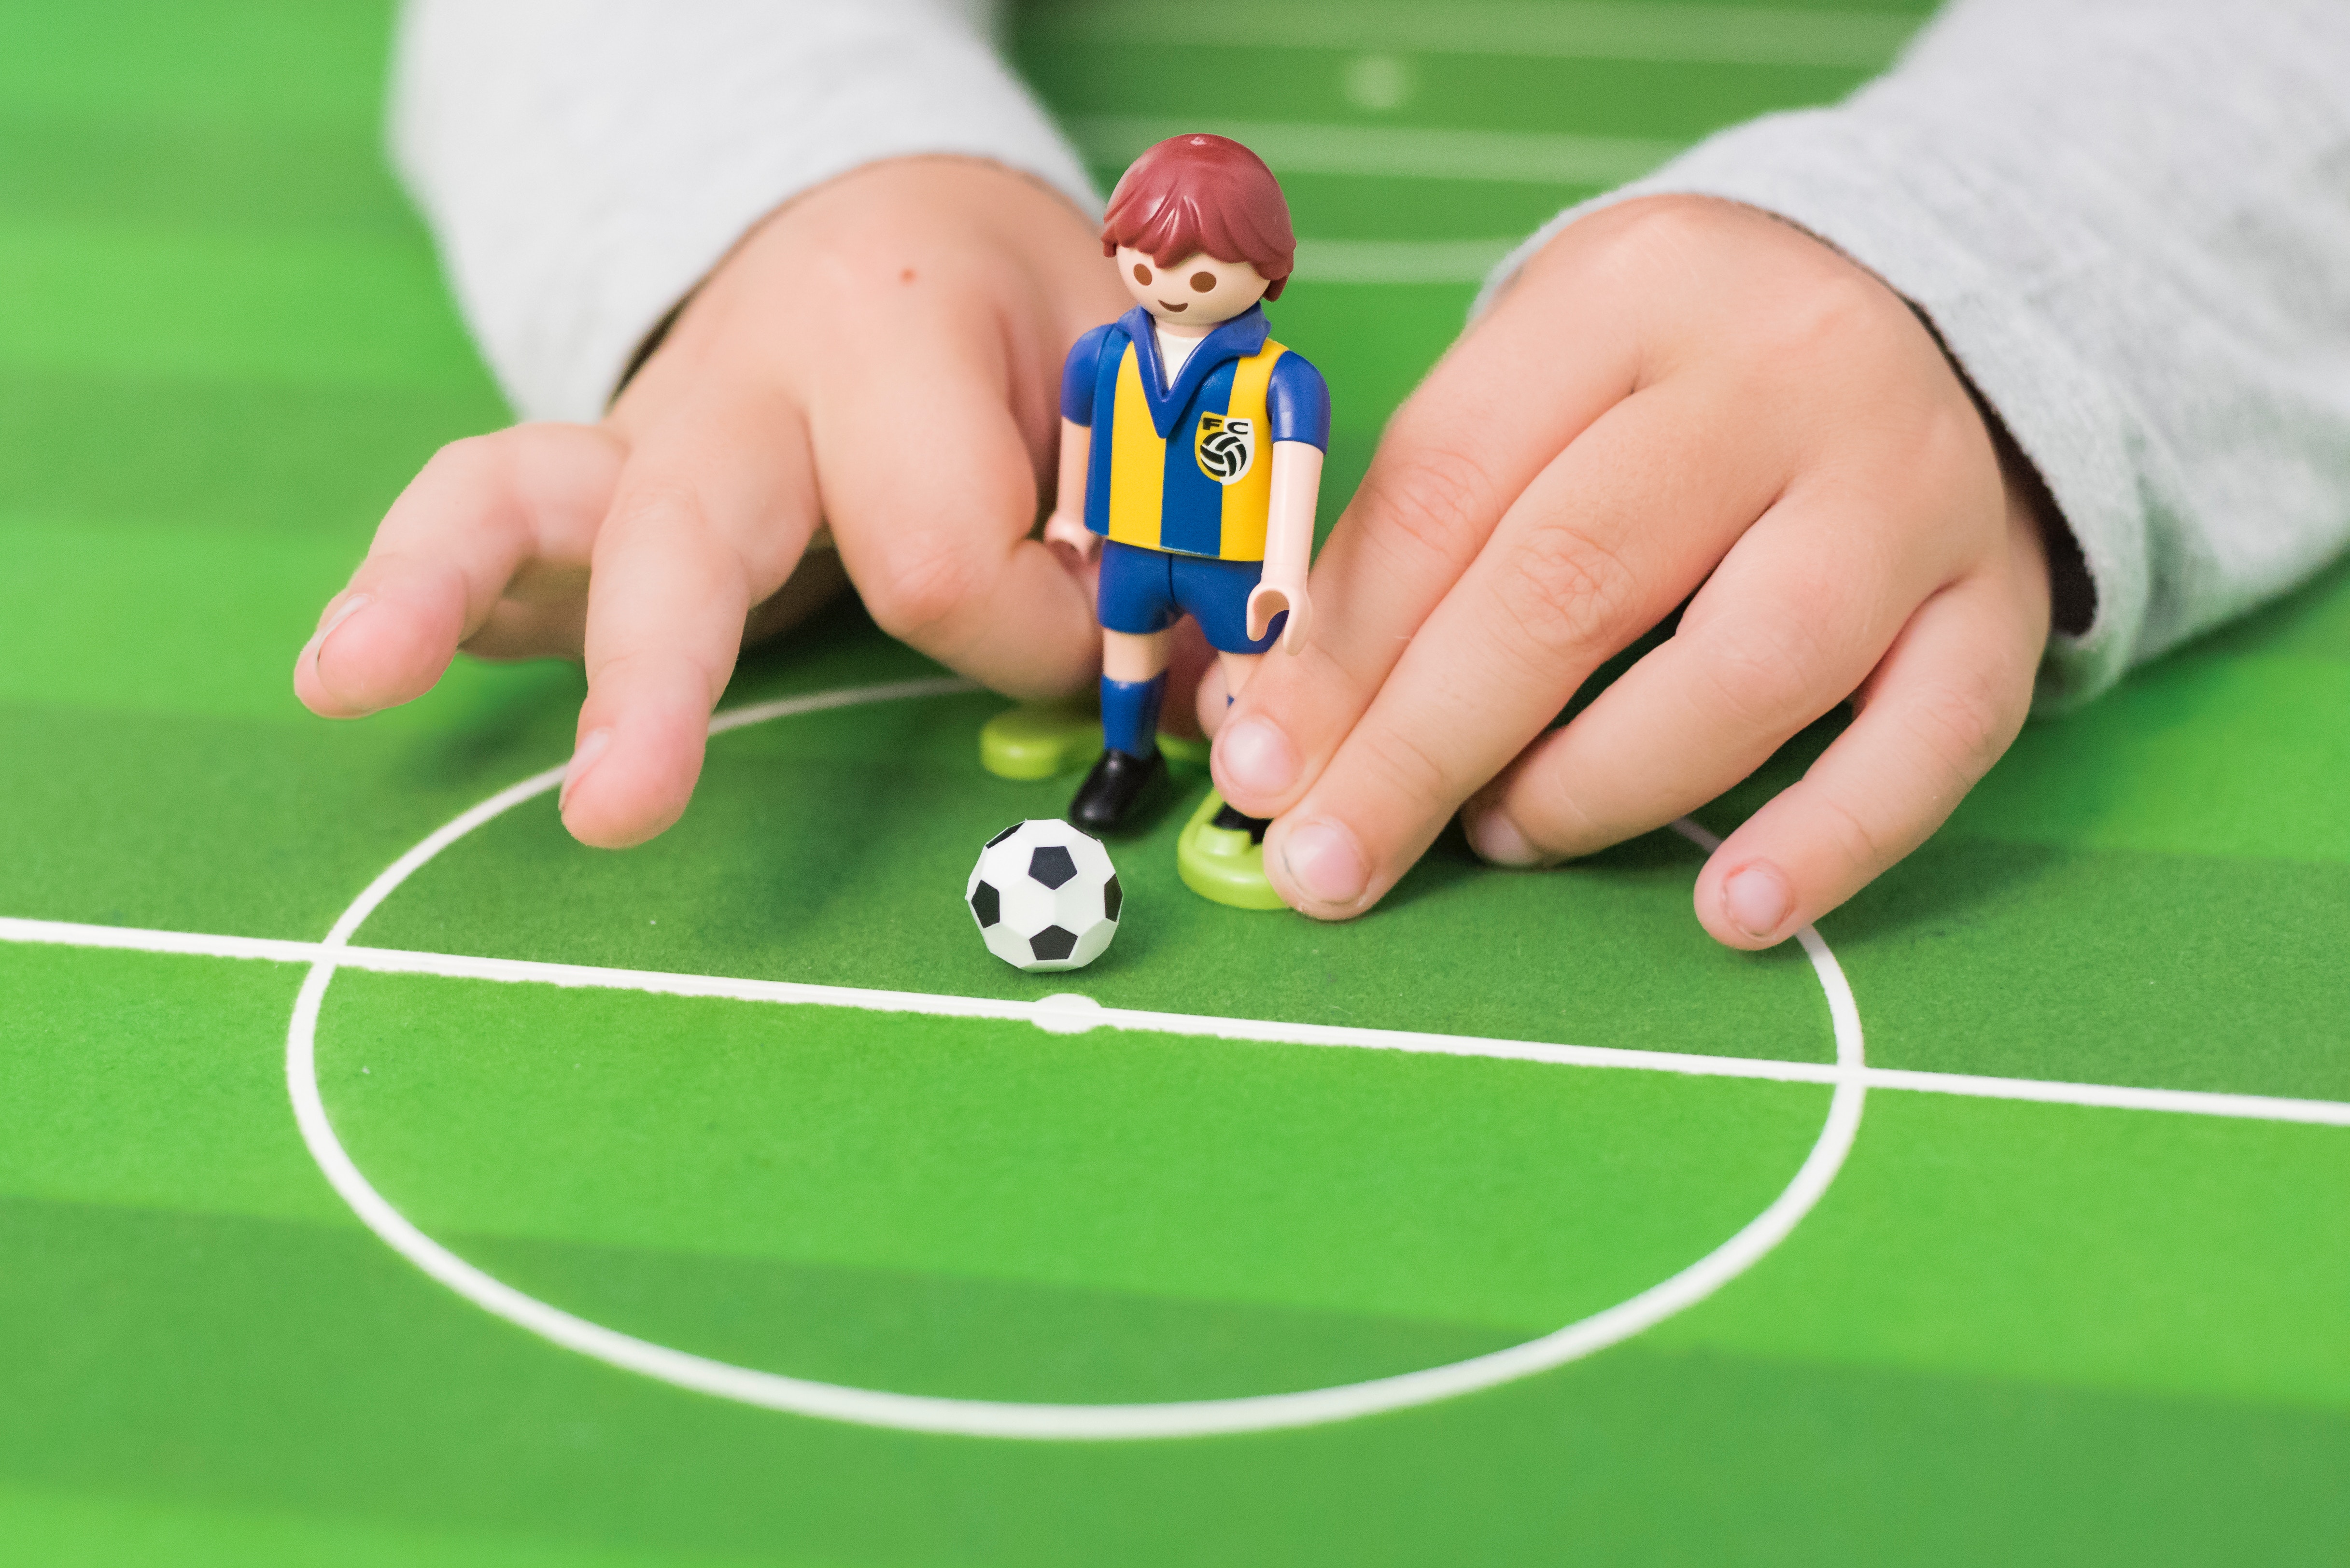 Child playing with a toy football player 